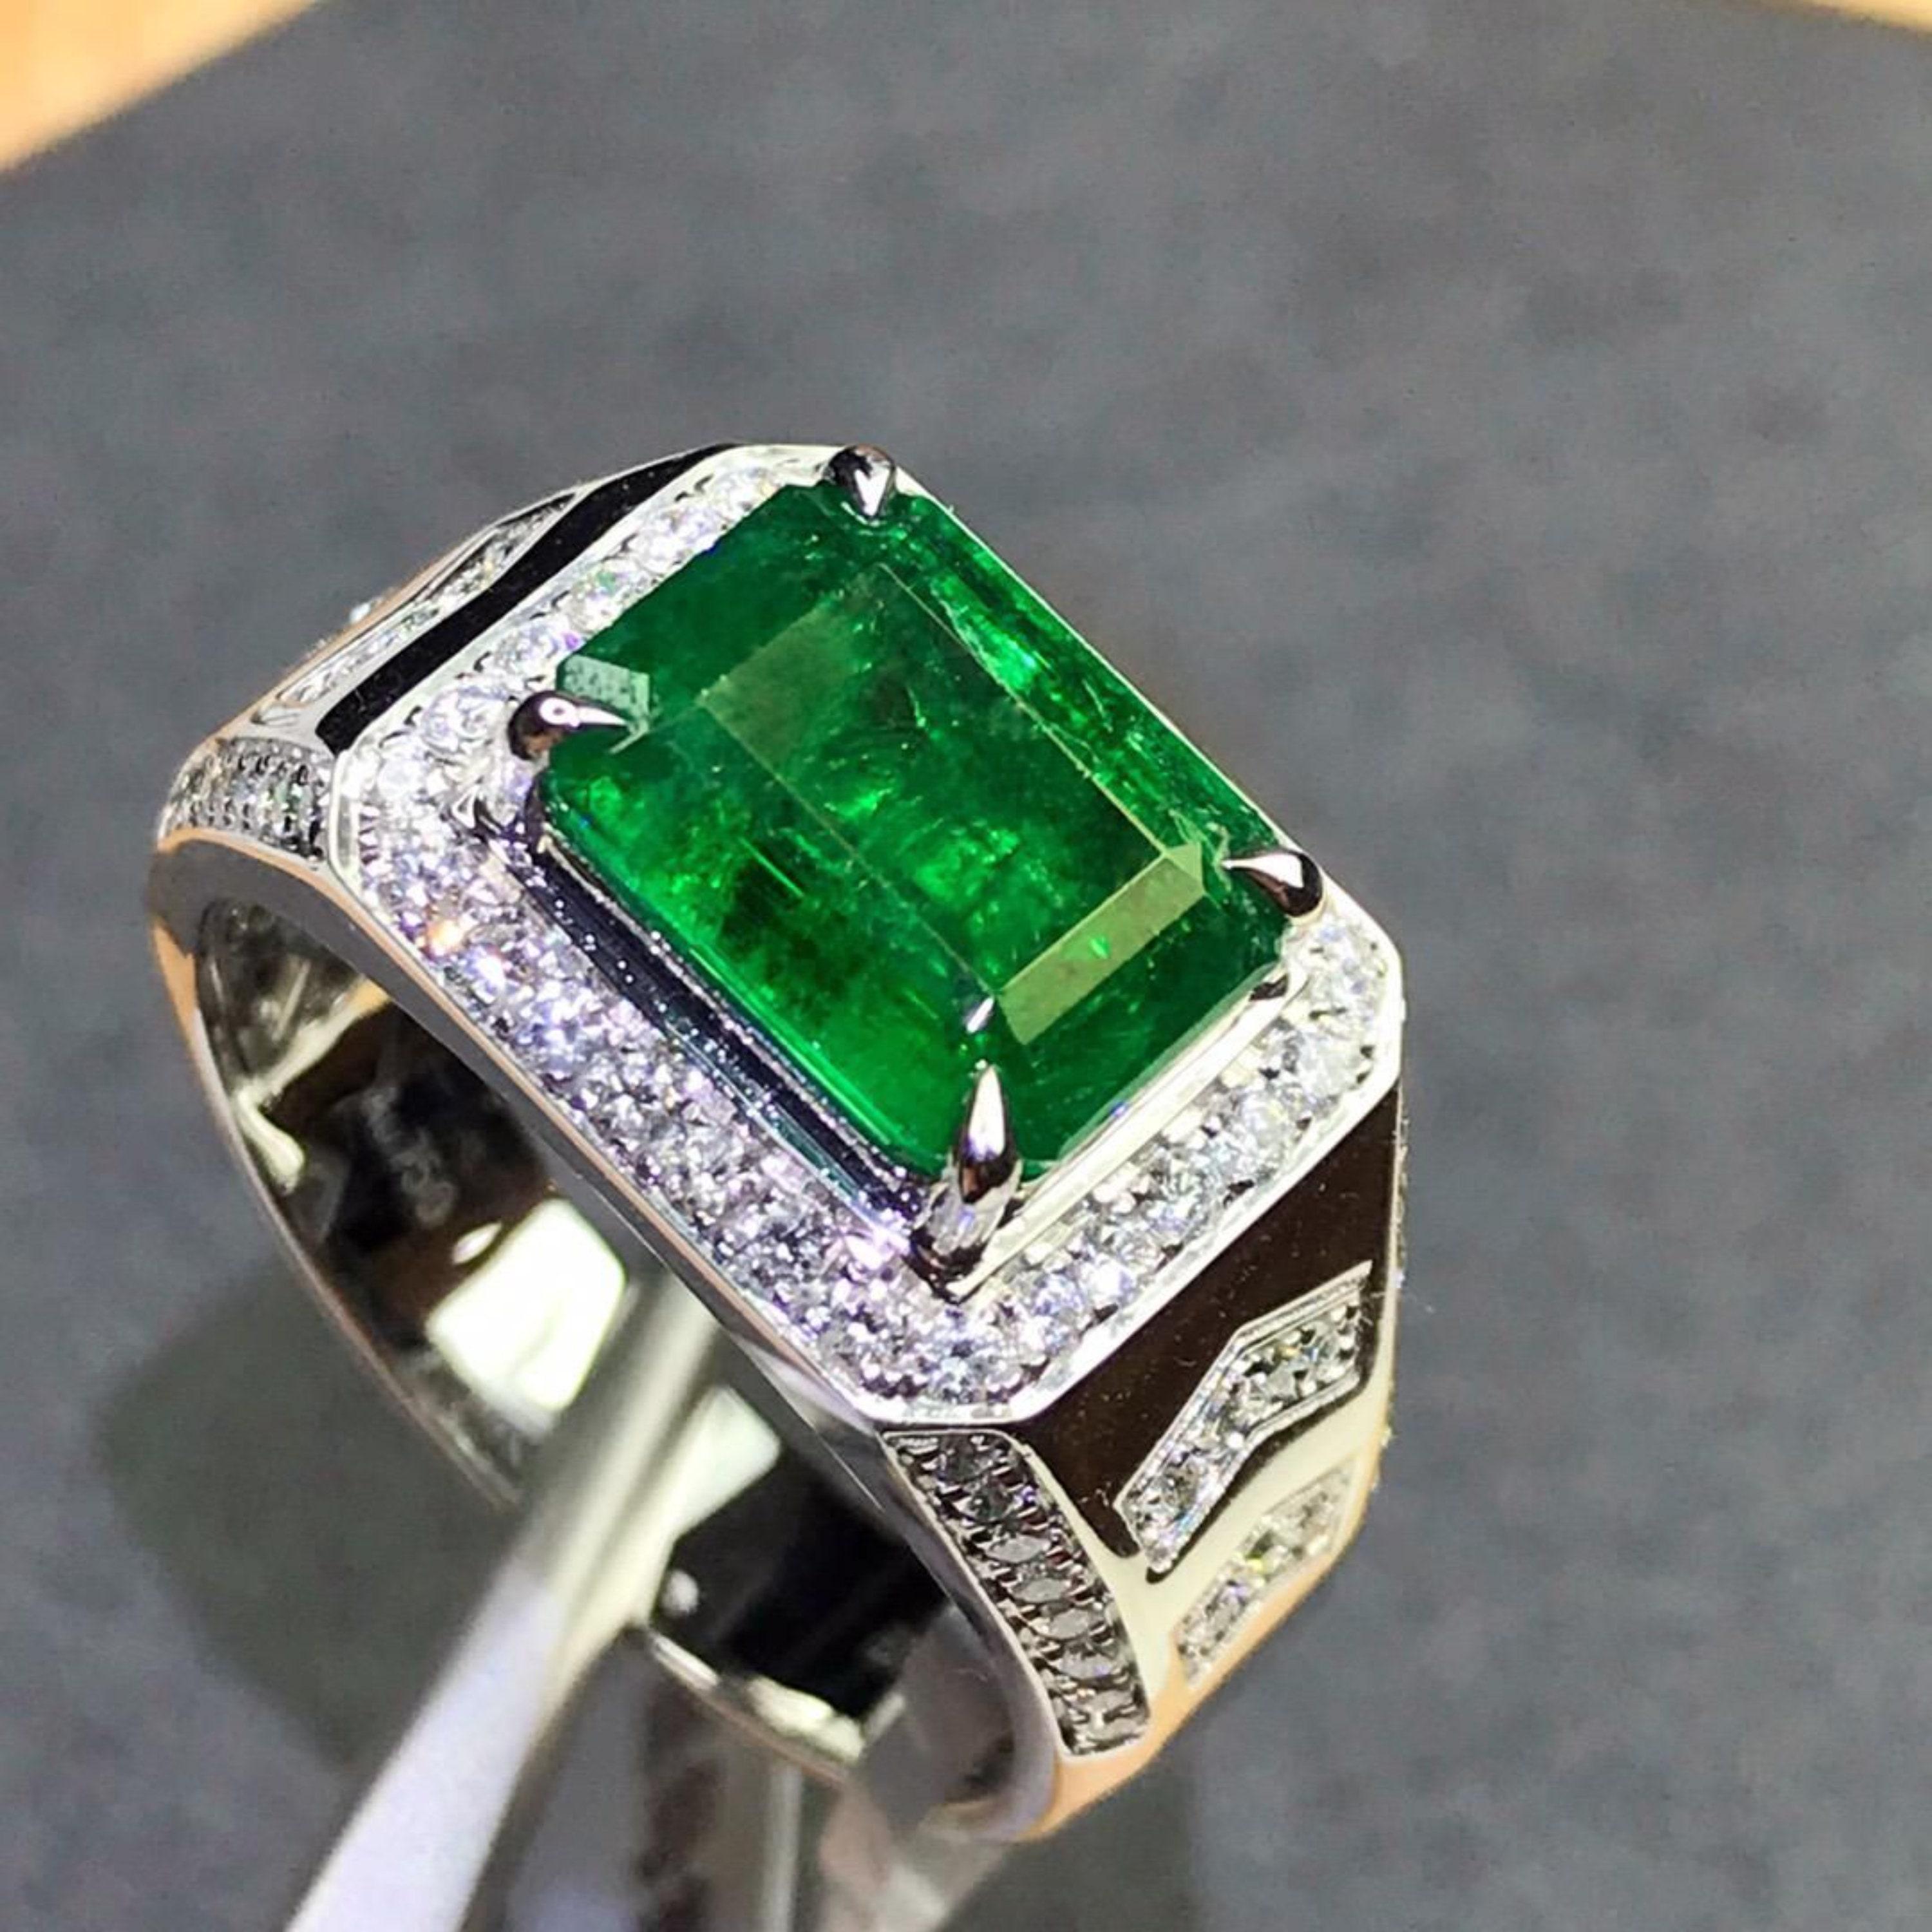 For Sale:  Certified 3 CT Natural Emerald Diamond Engagement Ring in 18K Gold For Men's 7